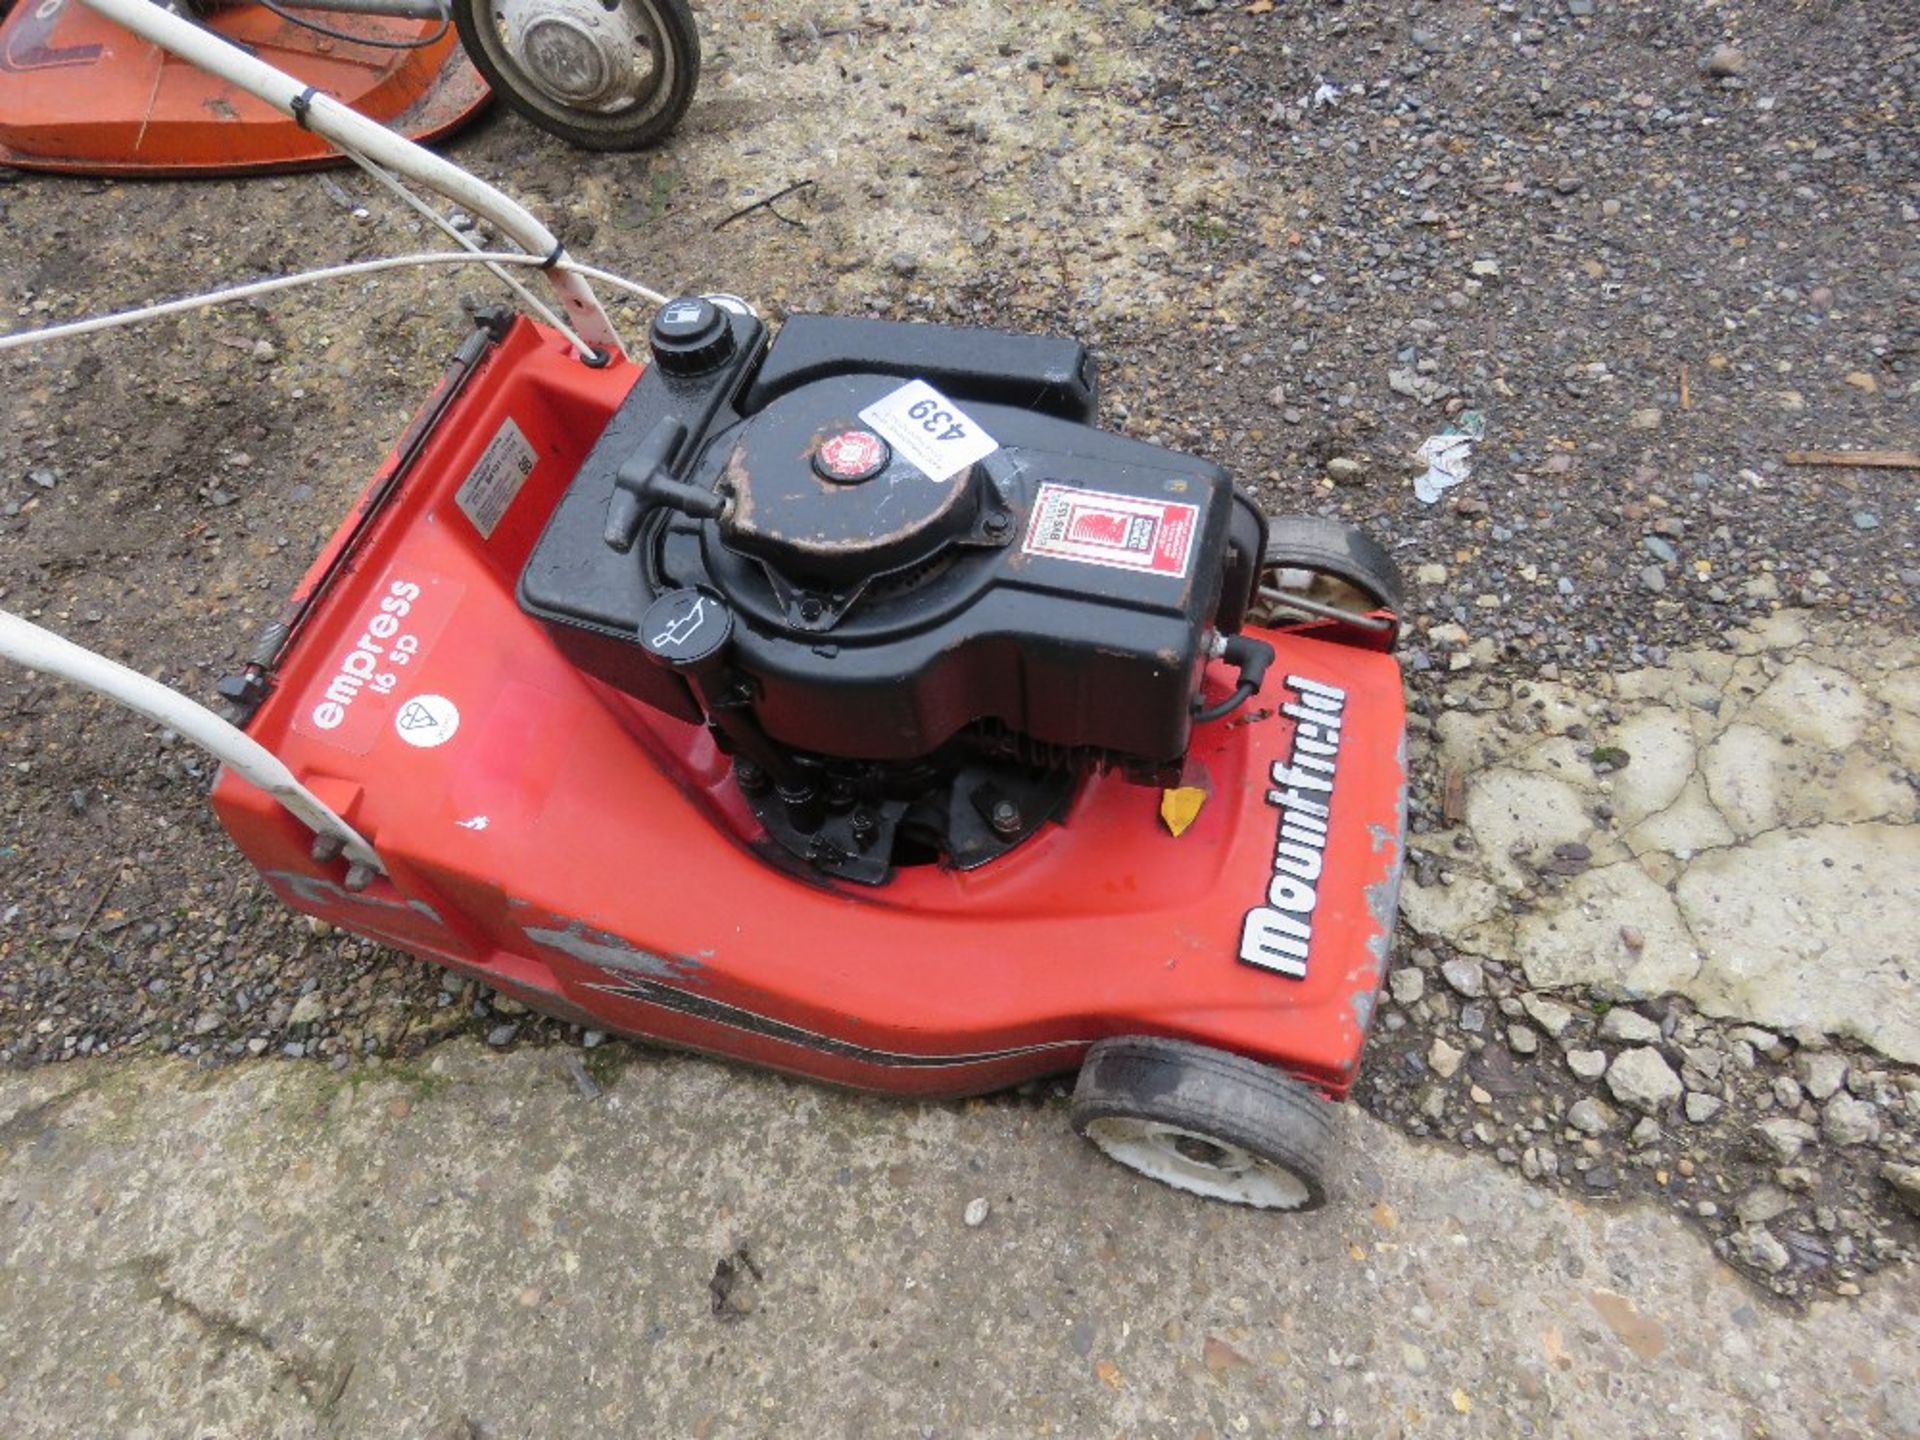 MOUNTFIELD EMPRESS PETROL ENGINED LAWN MOWER, NO BOX. THIS LOT IS SOLD UNDER THE AUCTIONEERS MARG - Image 2 of 4